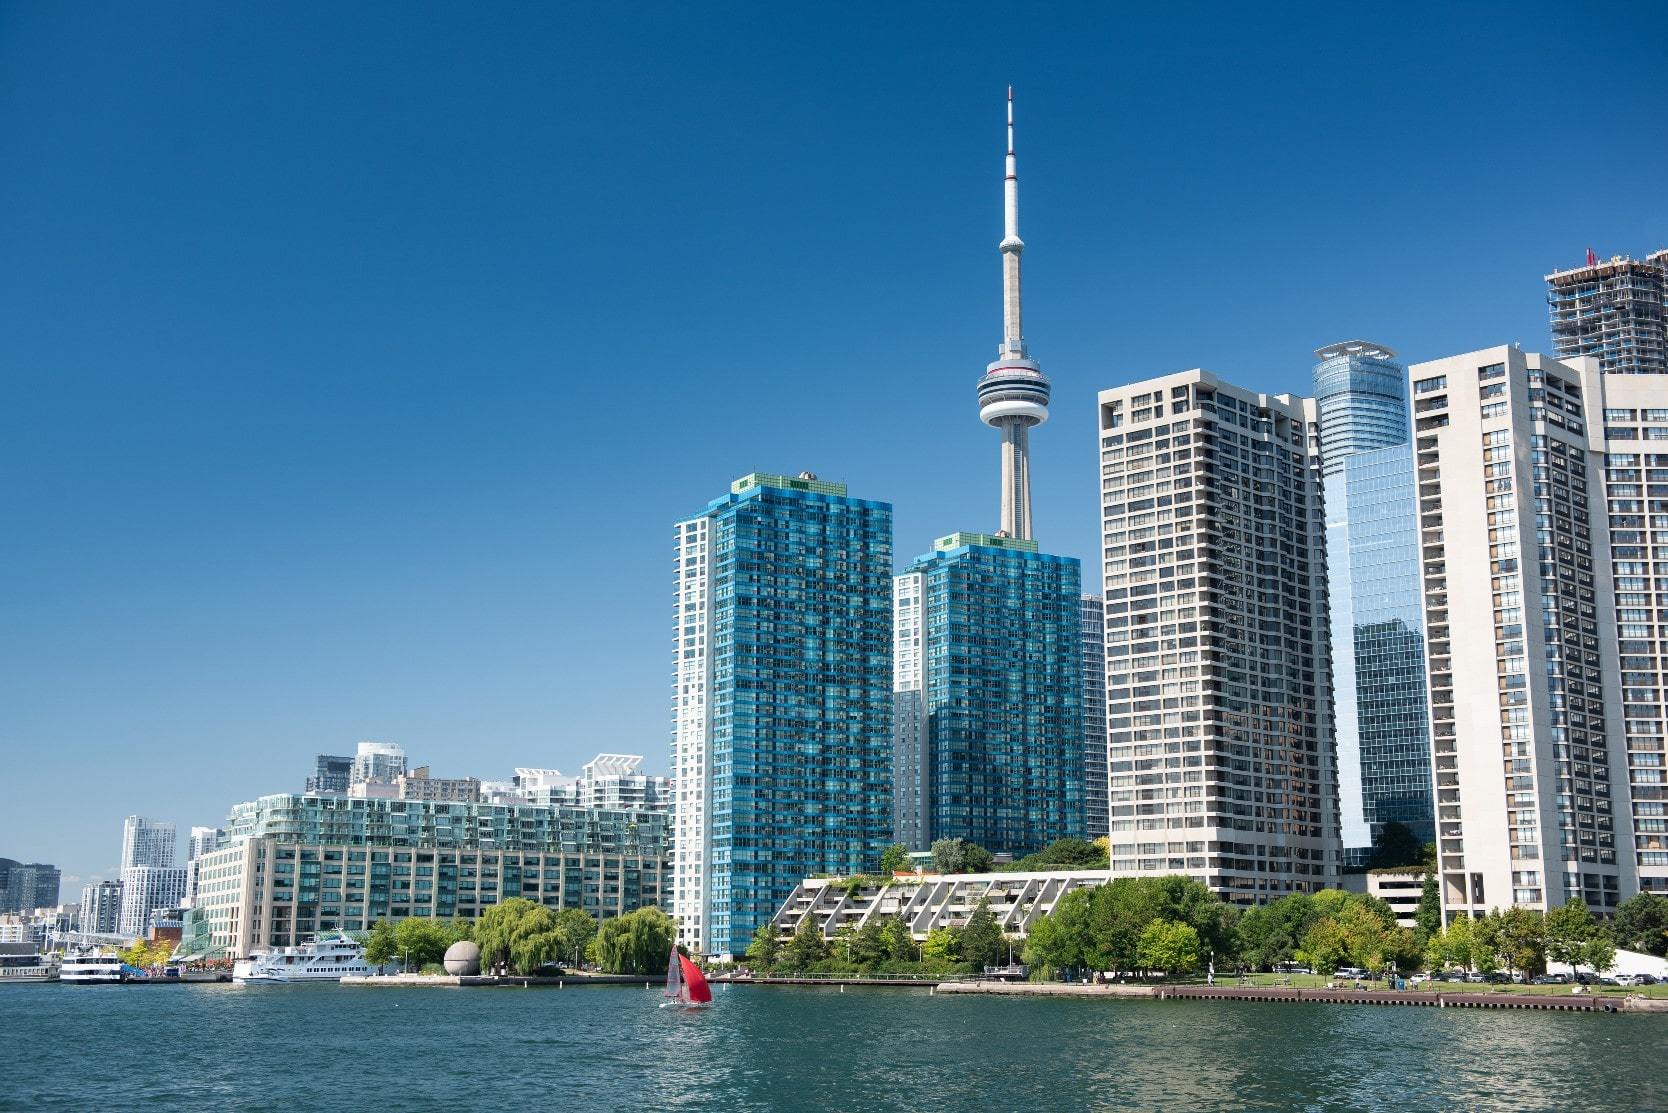 Lake Ontario with Toronto condos and the CN Tower in the background